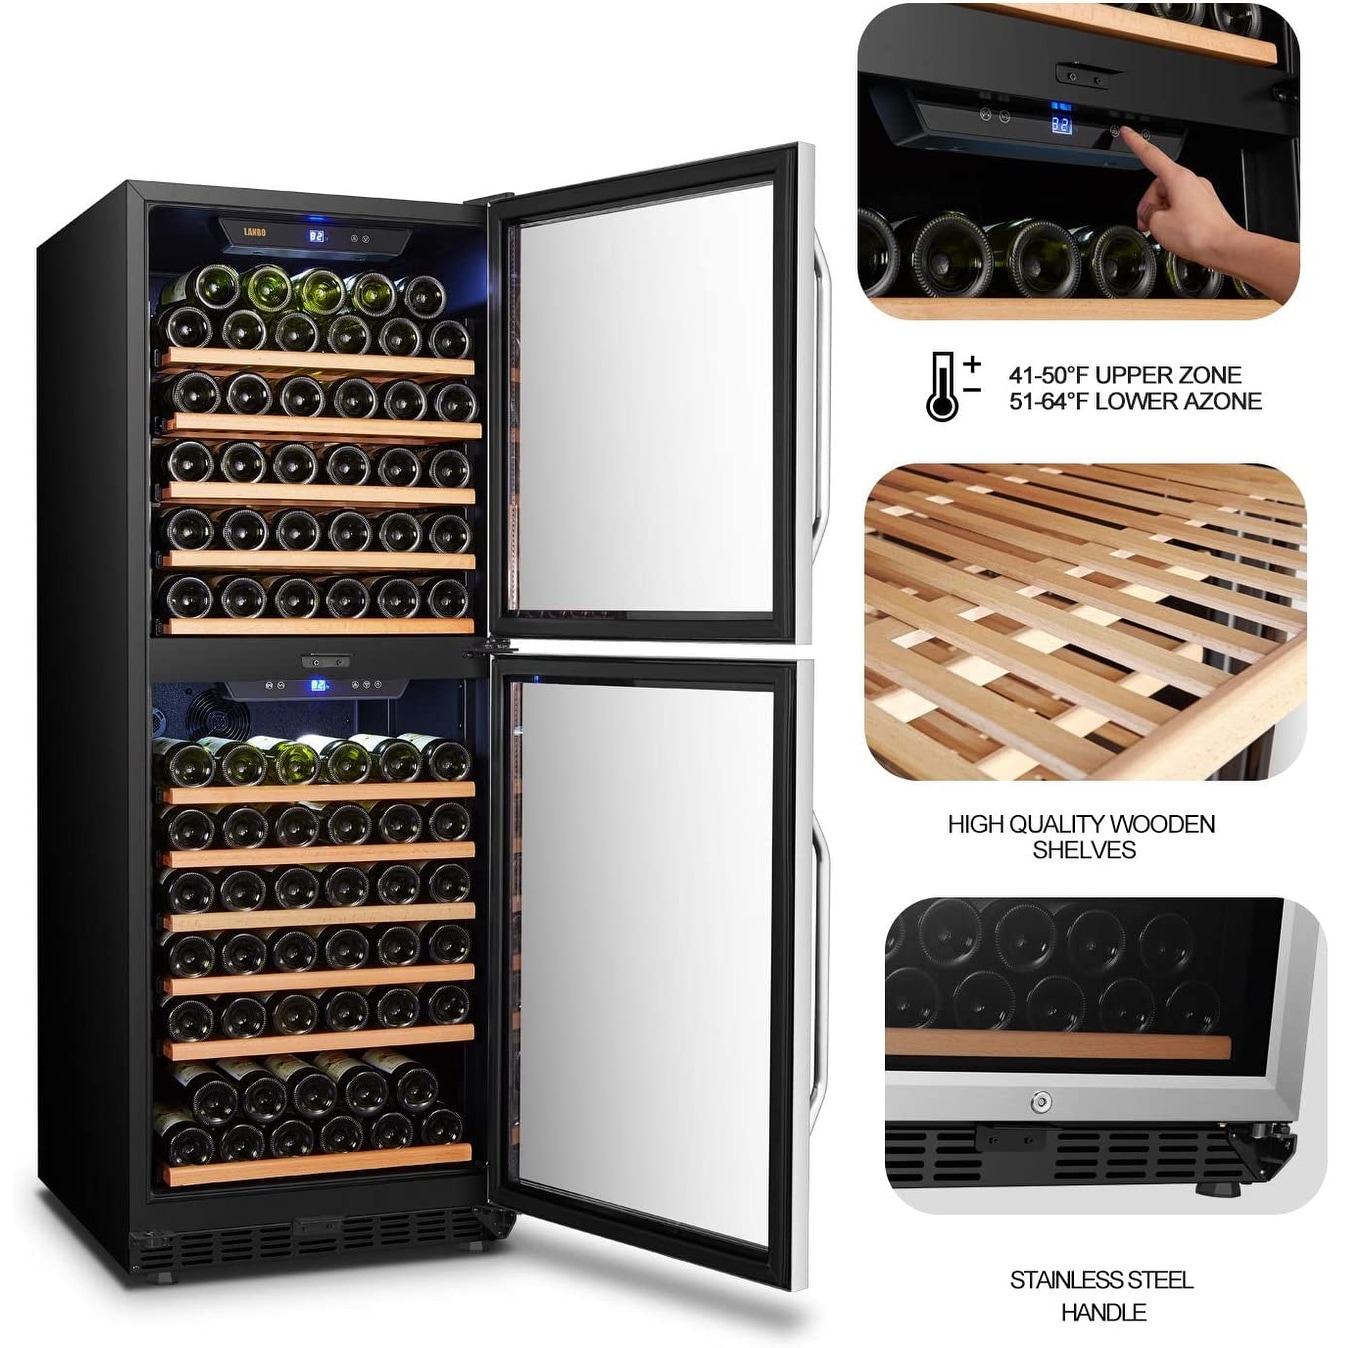 https://ak1.ostkcdn.com/images/products/is/images/direct/b1cddad47d168ac18c375174a05bdd97a1bef238/Lanbo-Built-in-Dual-Zone-Wine-Cooler-with-Dual-Glass-Doors%2C-133-Bottle.jpg